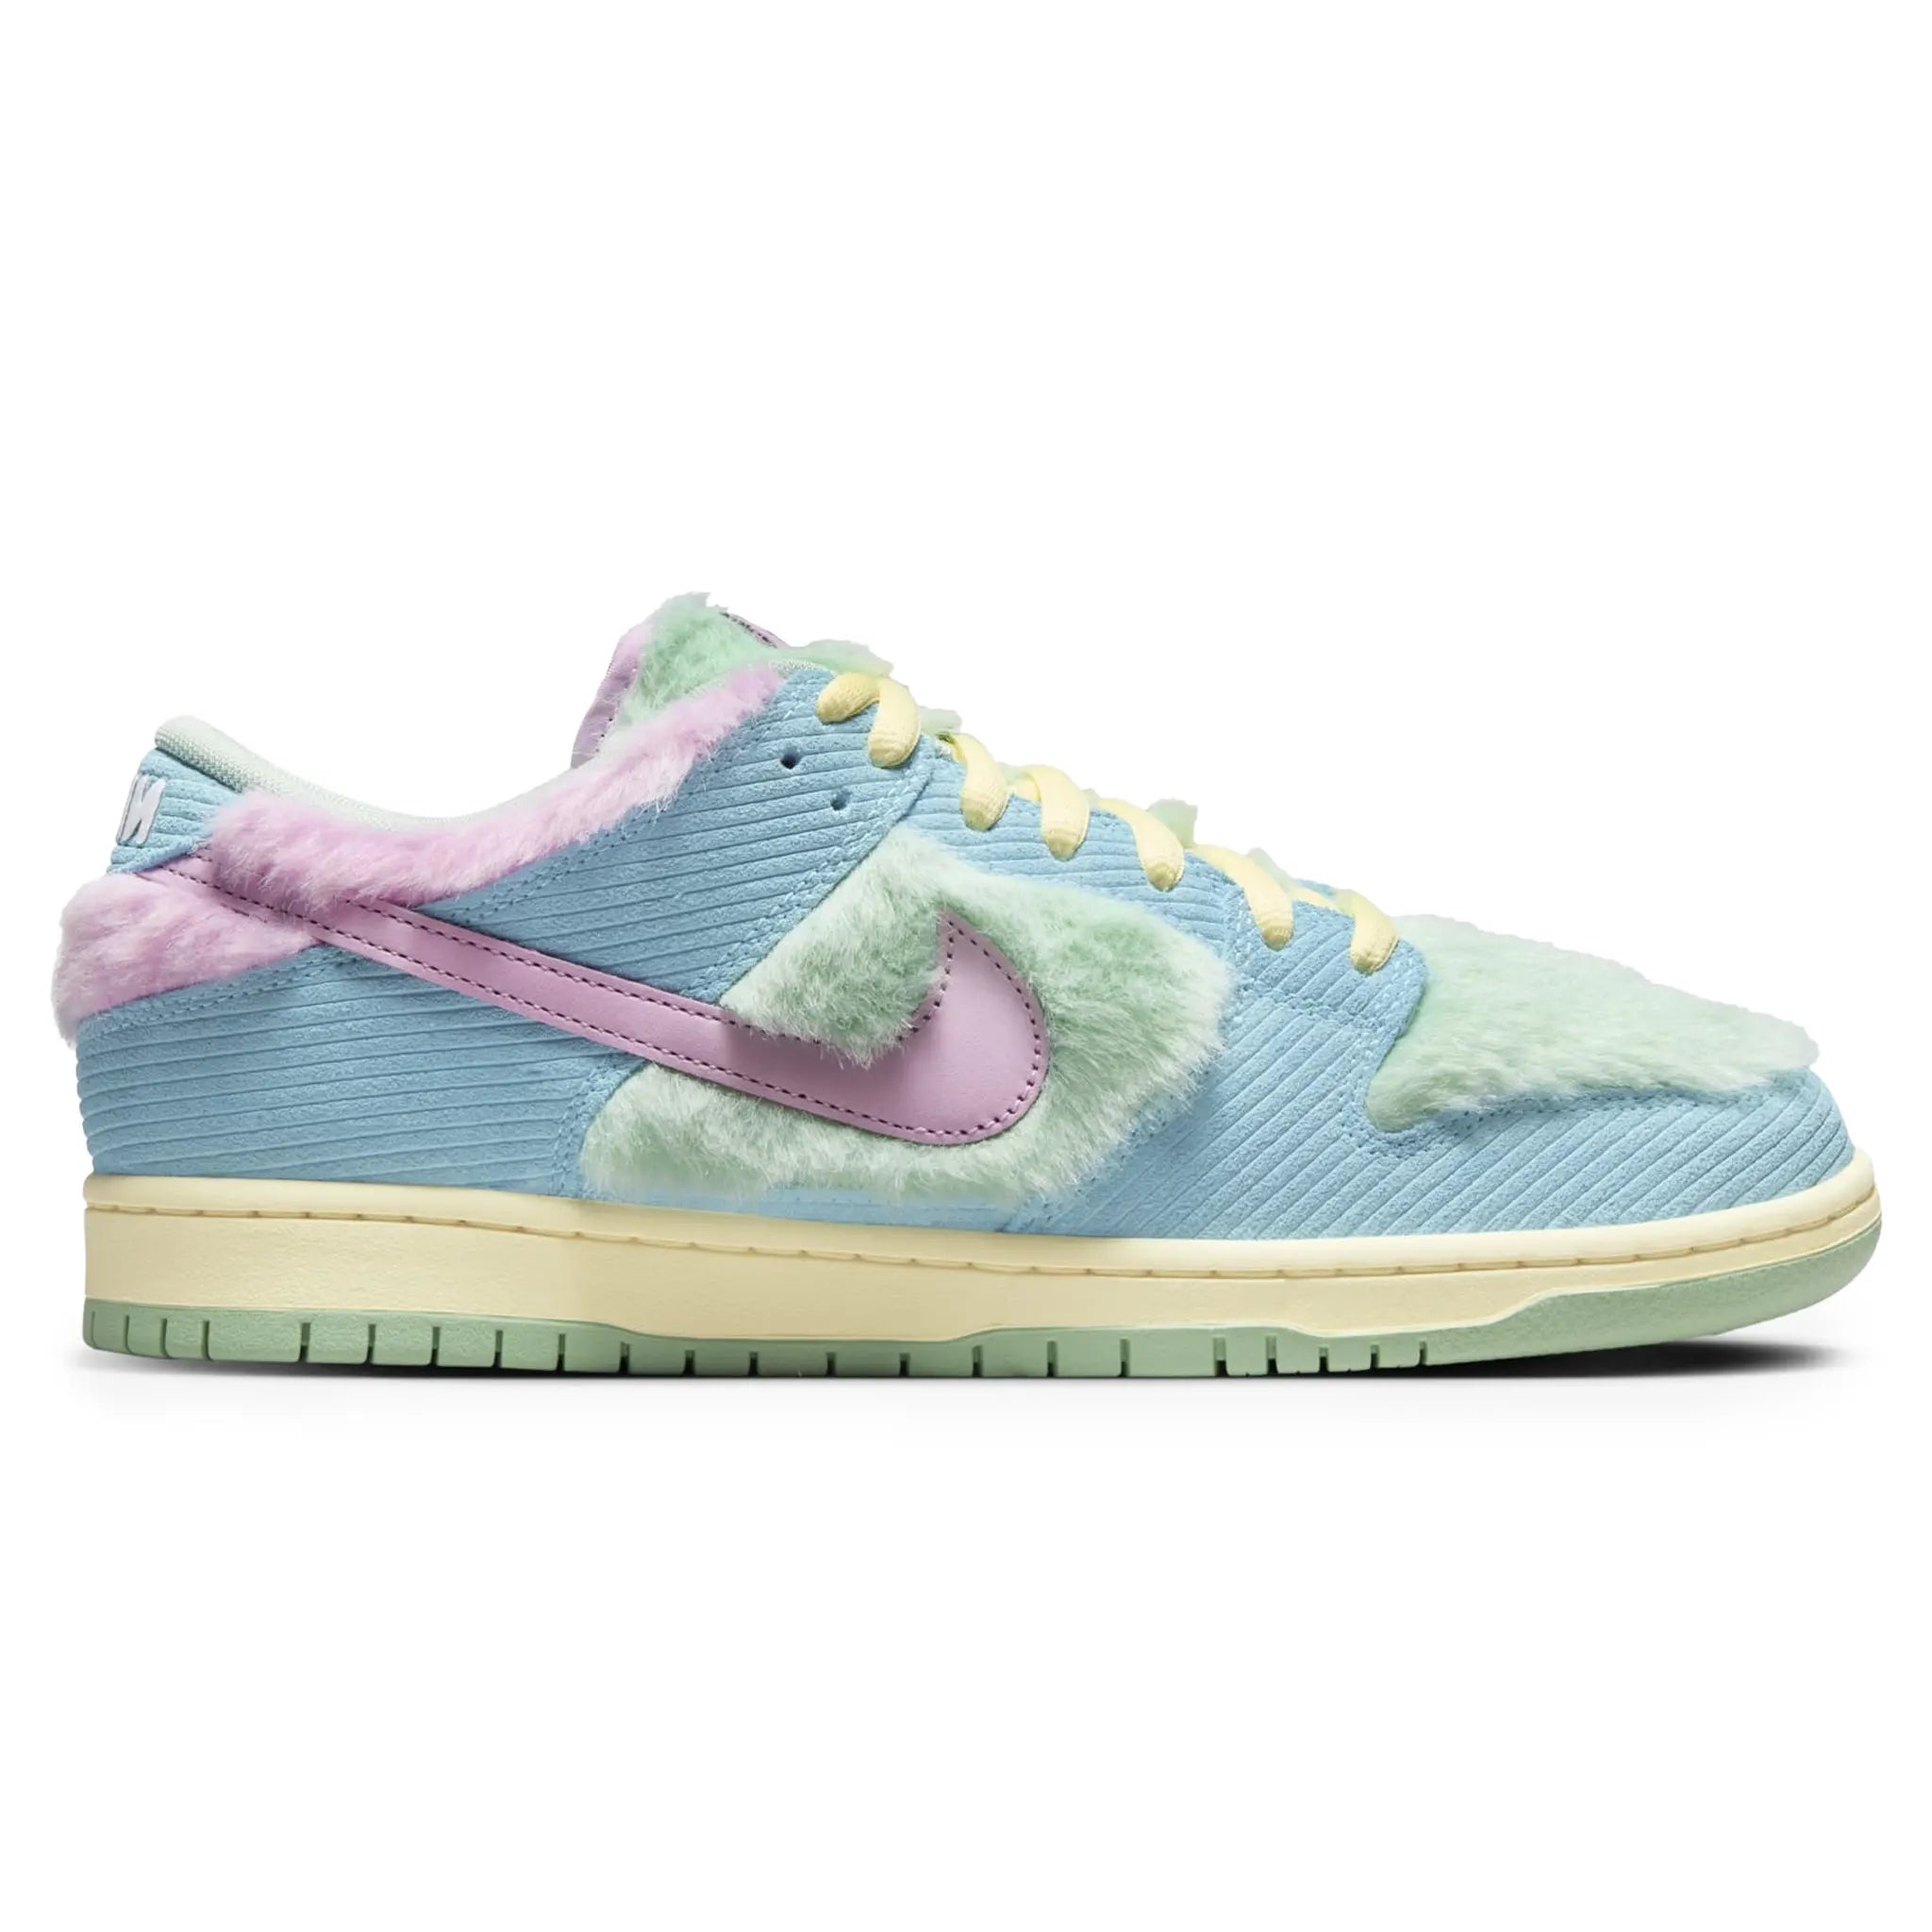 Side view of Verdy x Nike SB Dunk Low Visty FN6040-400